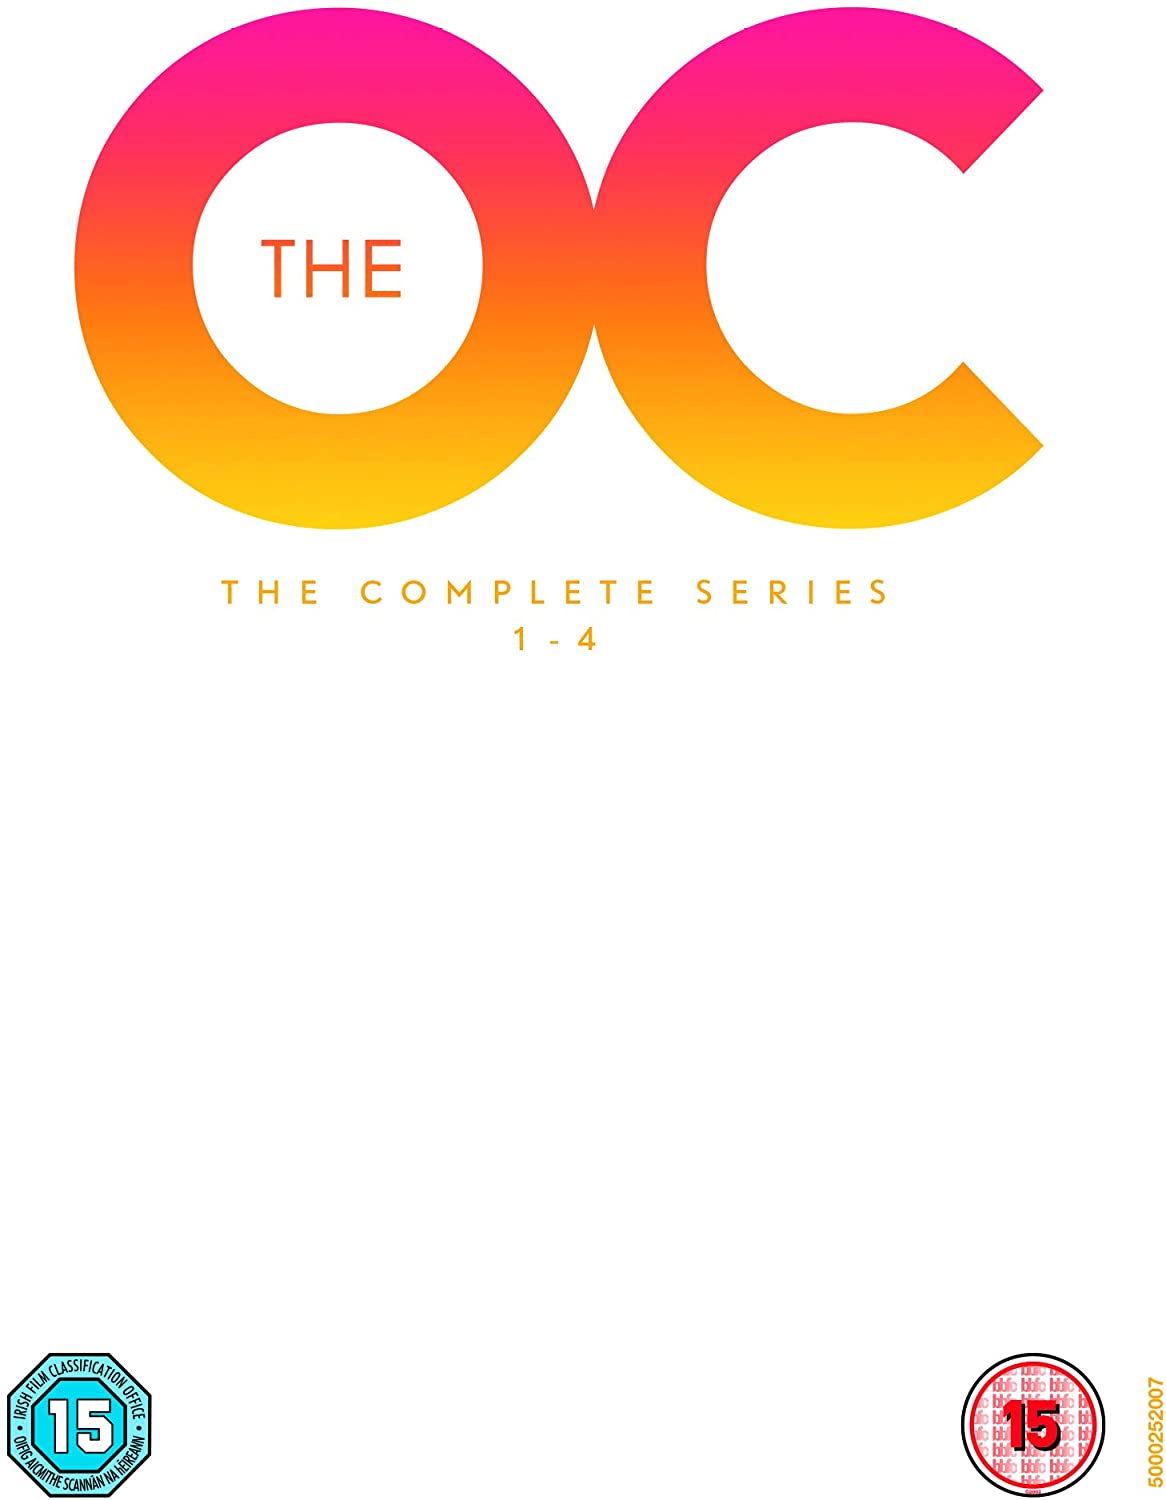 The O.C.: The Complete Series (Seasons 1-4) (DVD)